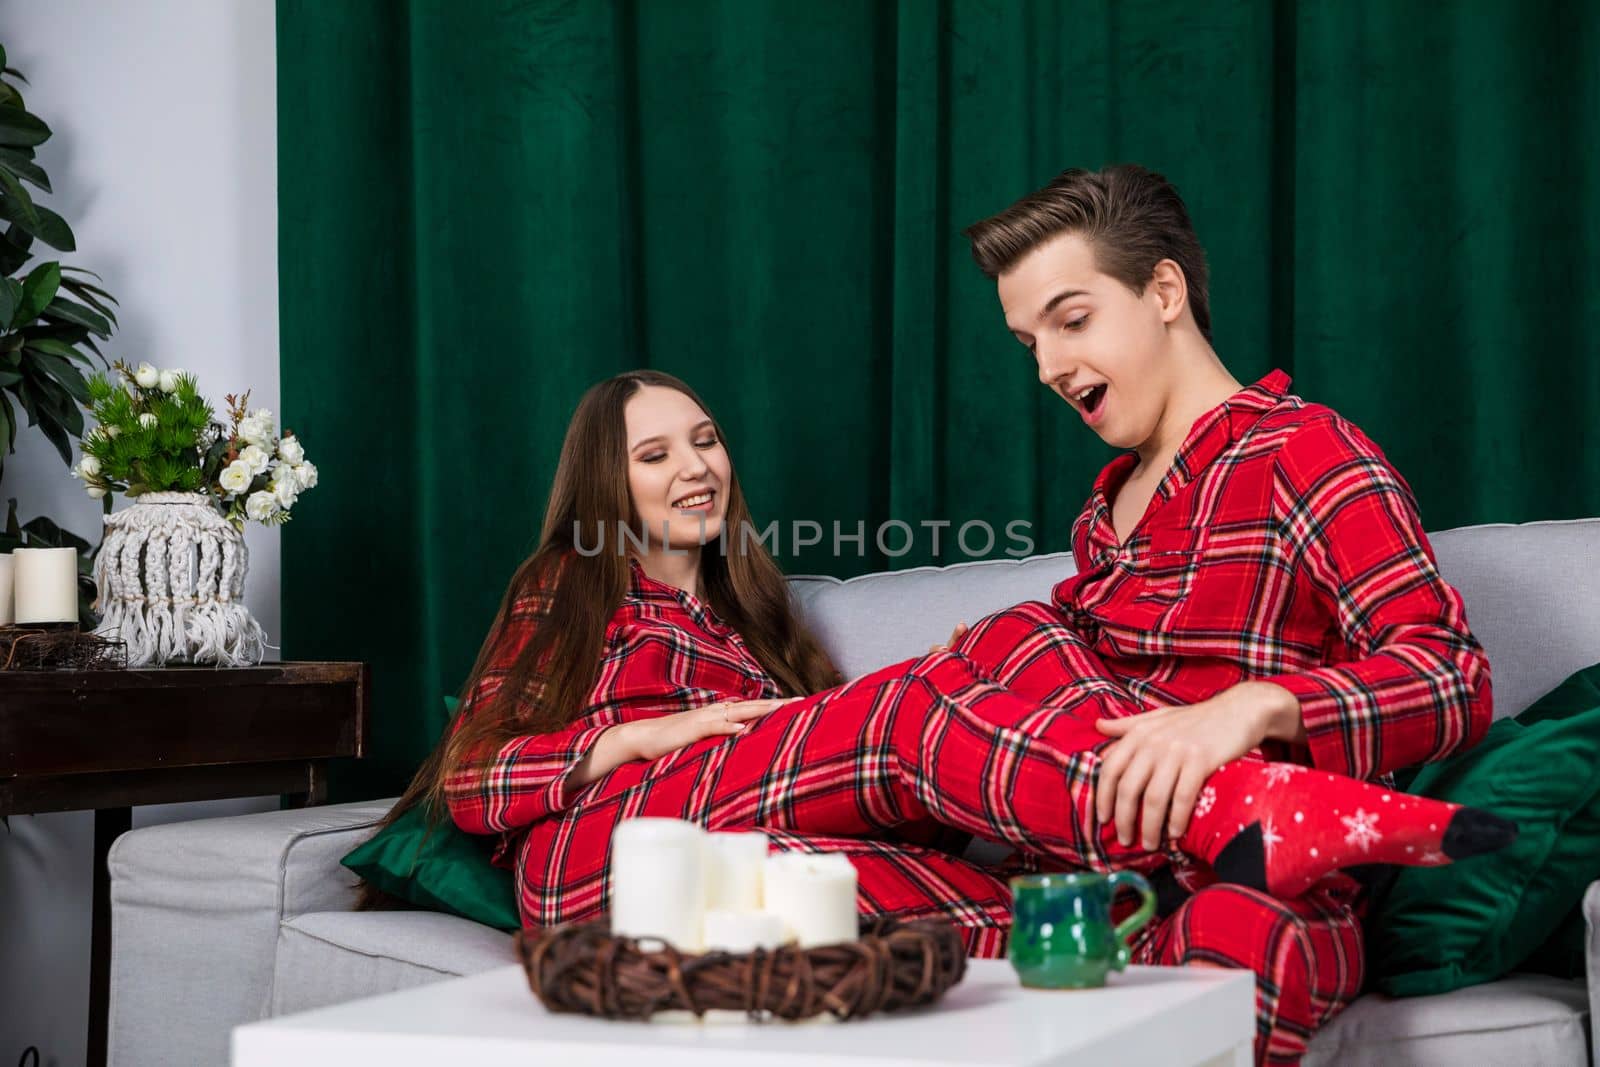 Girl and boy dressed in identical pajamas pose for a photo shoot. Photo session of a couple in love. Romantic photos of a man and a woman against the background of a green curtain.